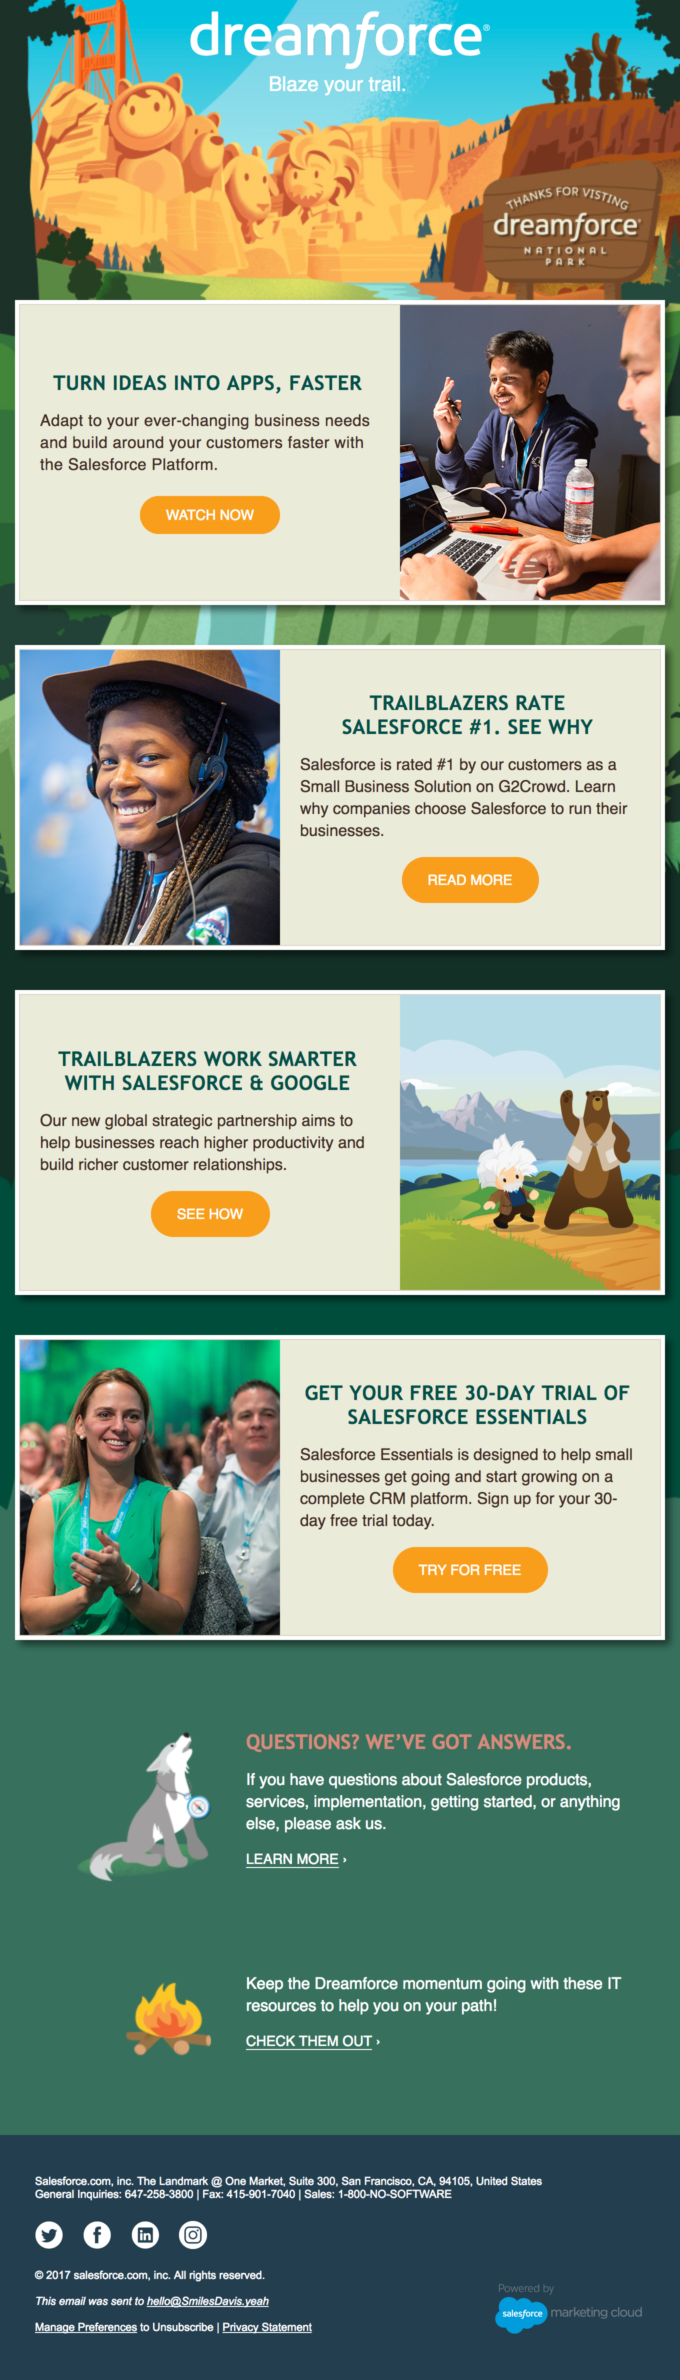 See how you can innovate faster with the Salesforce Platform - Salesforce Email Newsletter